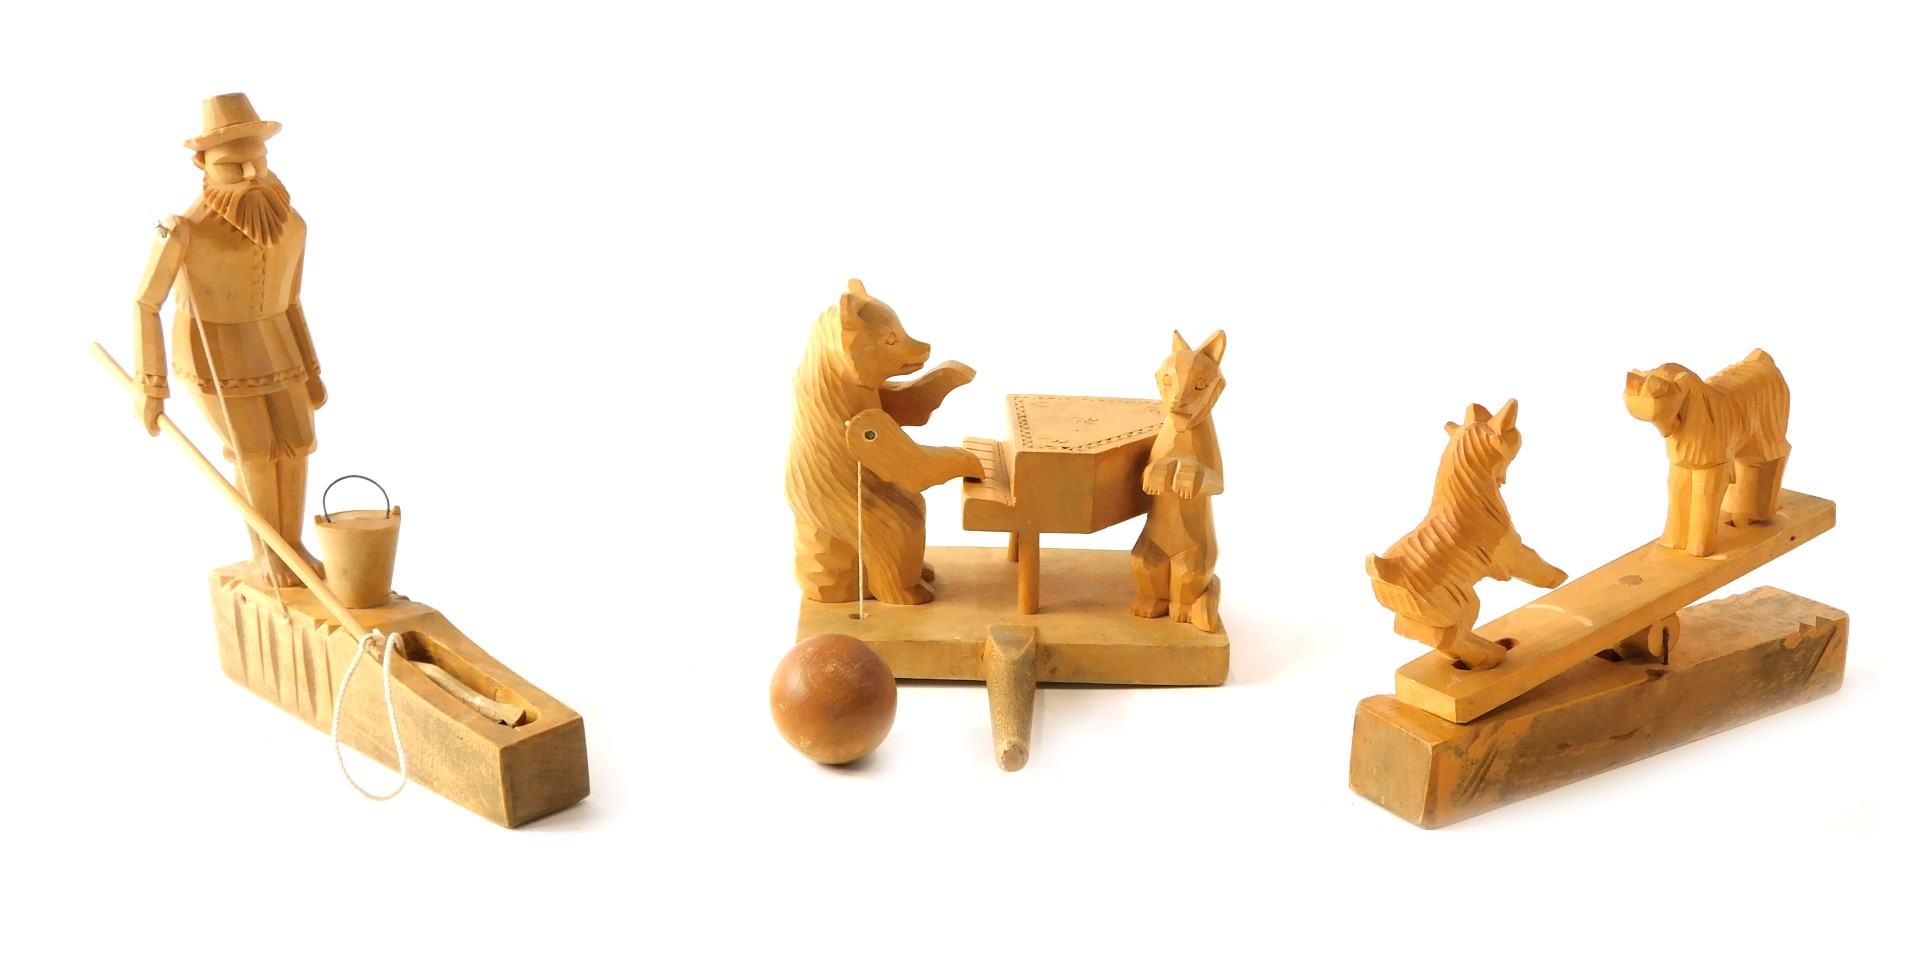 Three carved wooden animal figure groups, comprising goats on saw, man fishing, and bear playing p